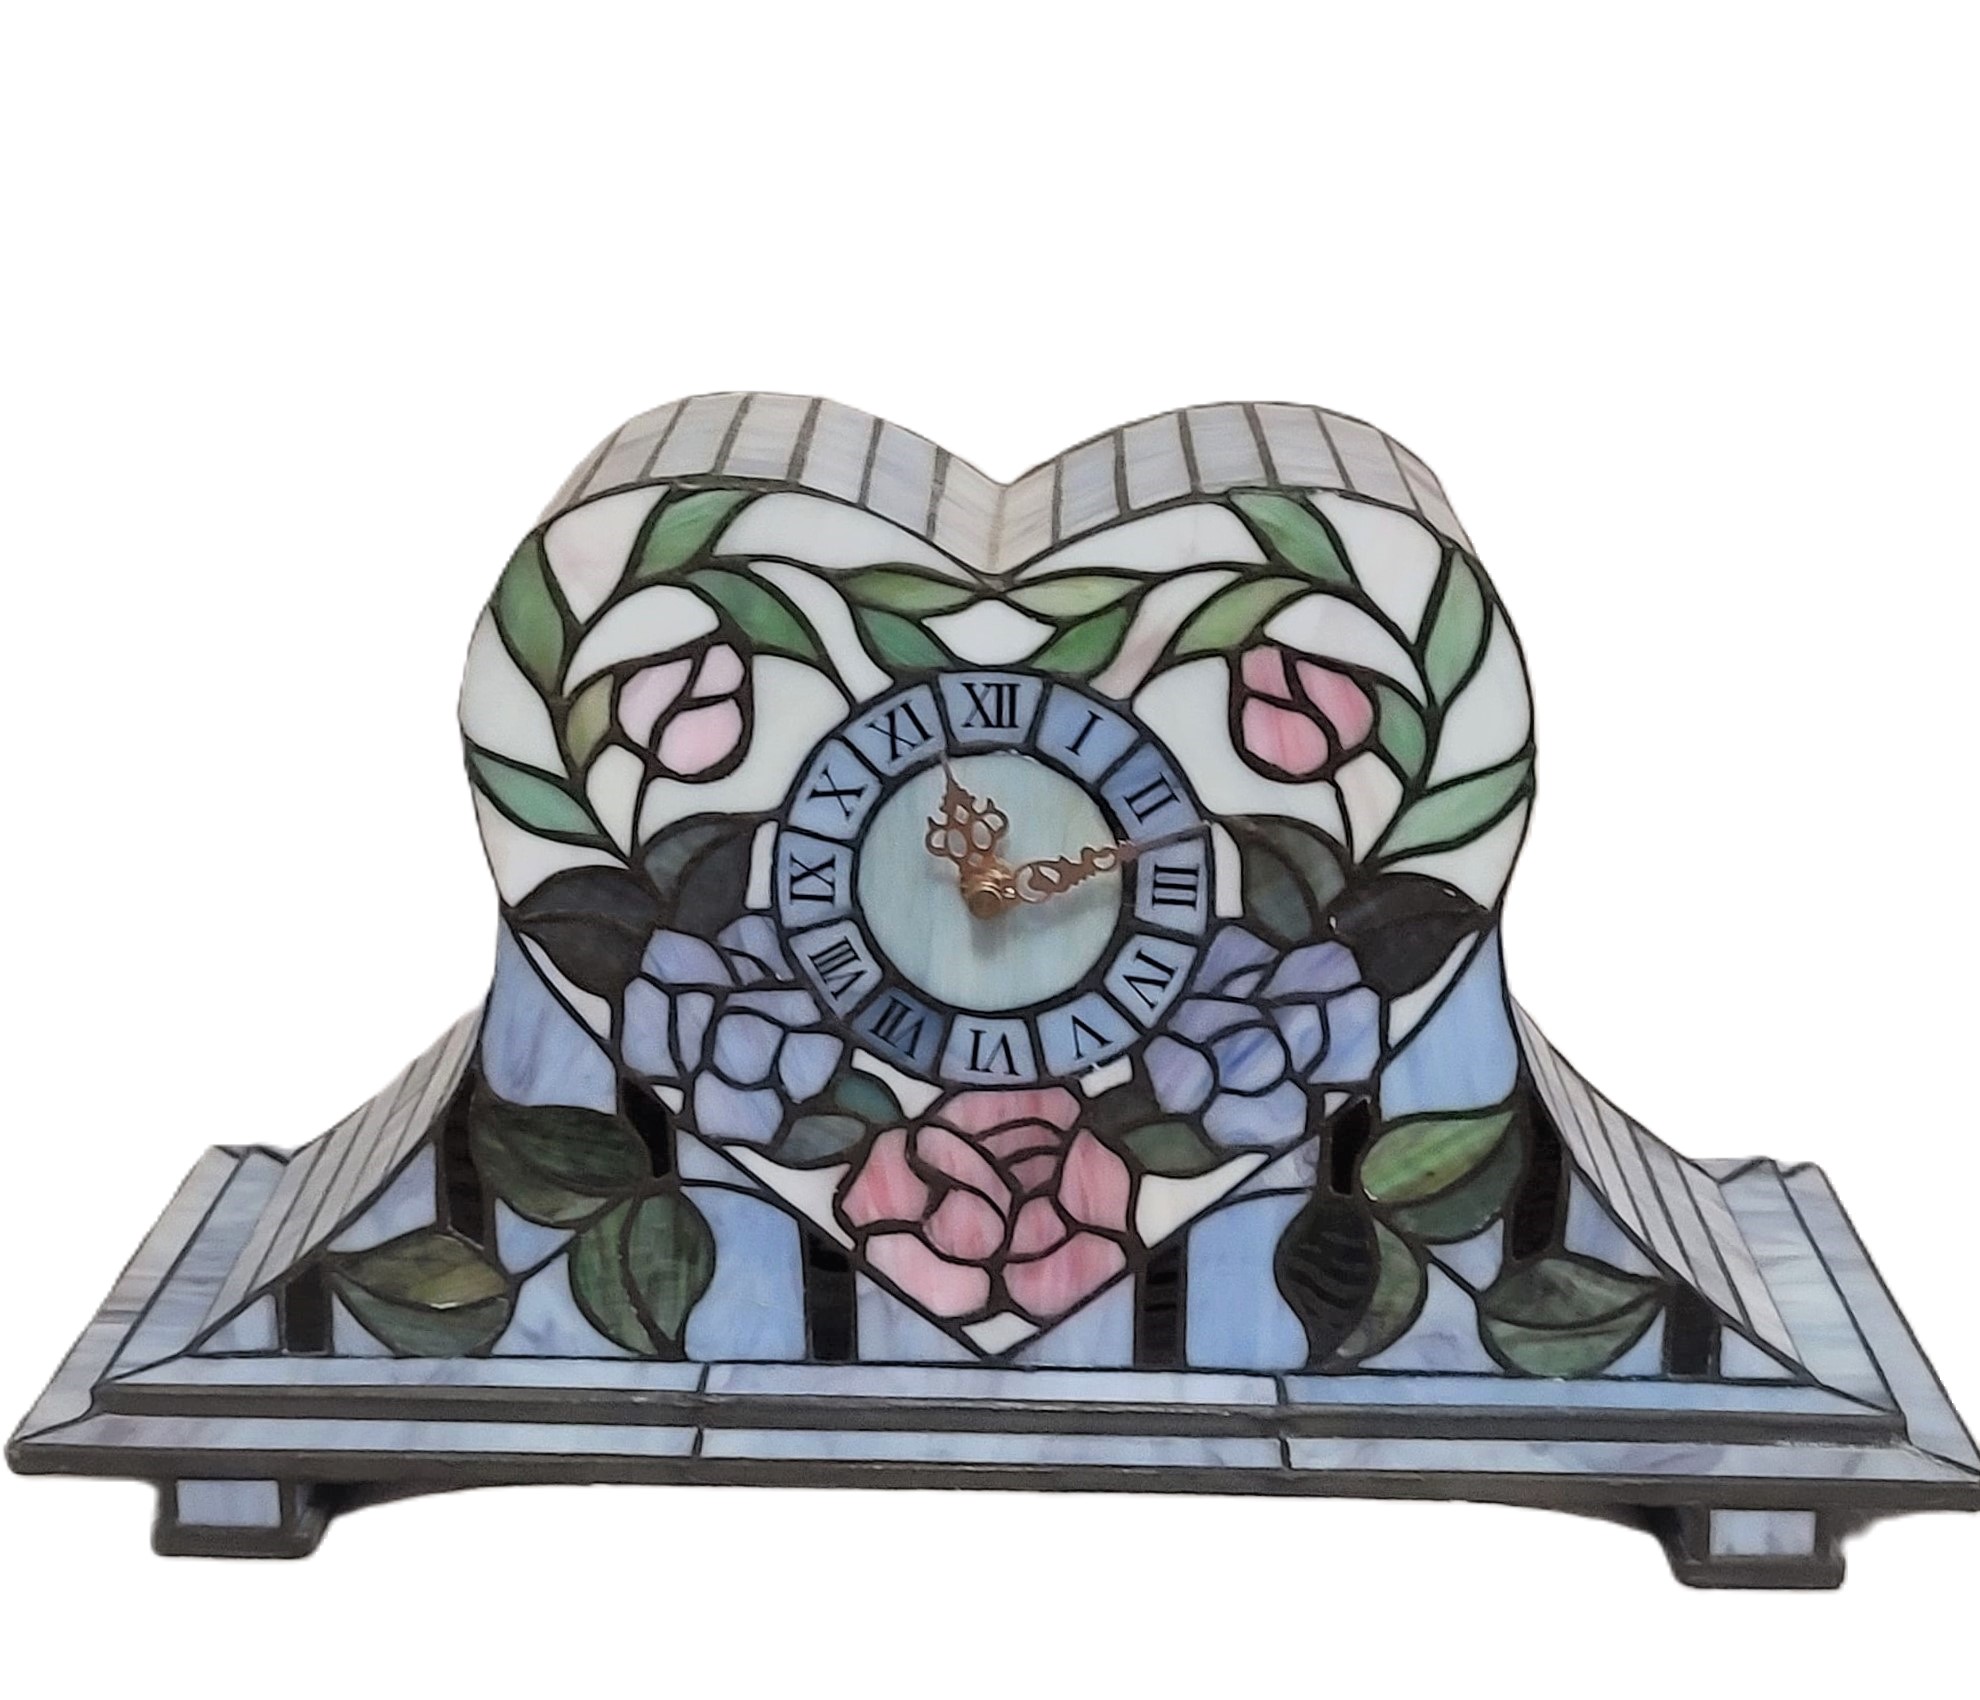 Tiffany style blue stained glass heart design mantel clock - Click Image to Close